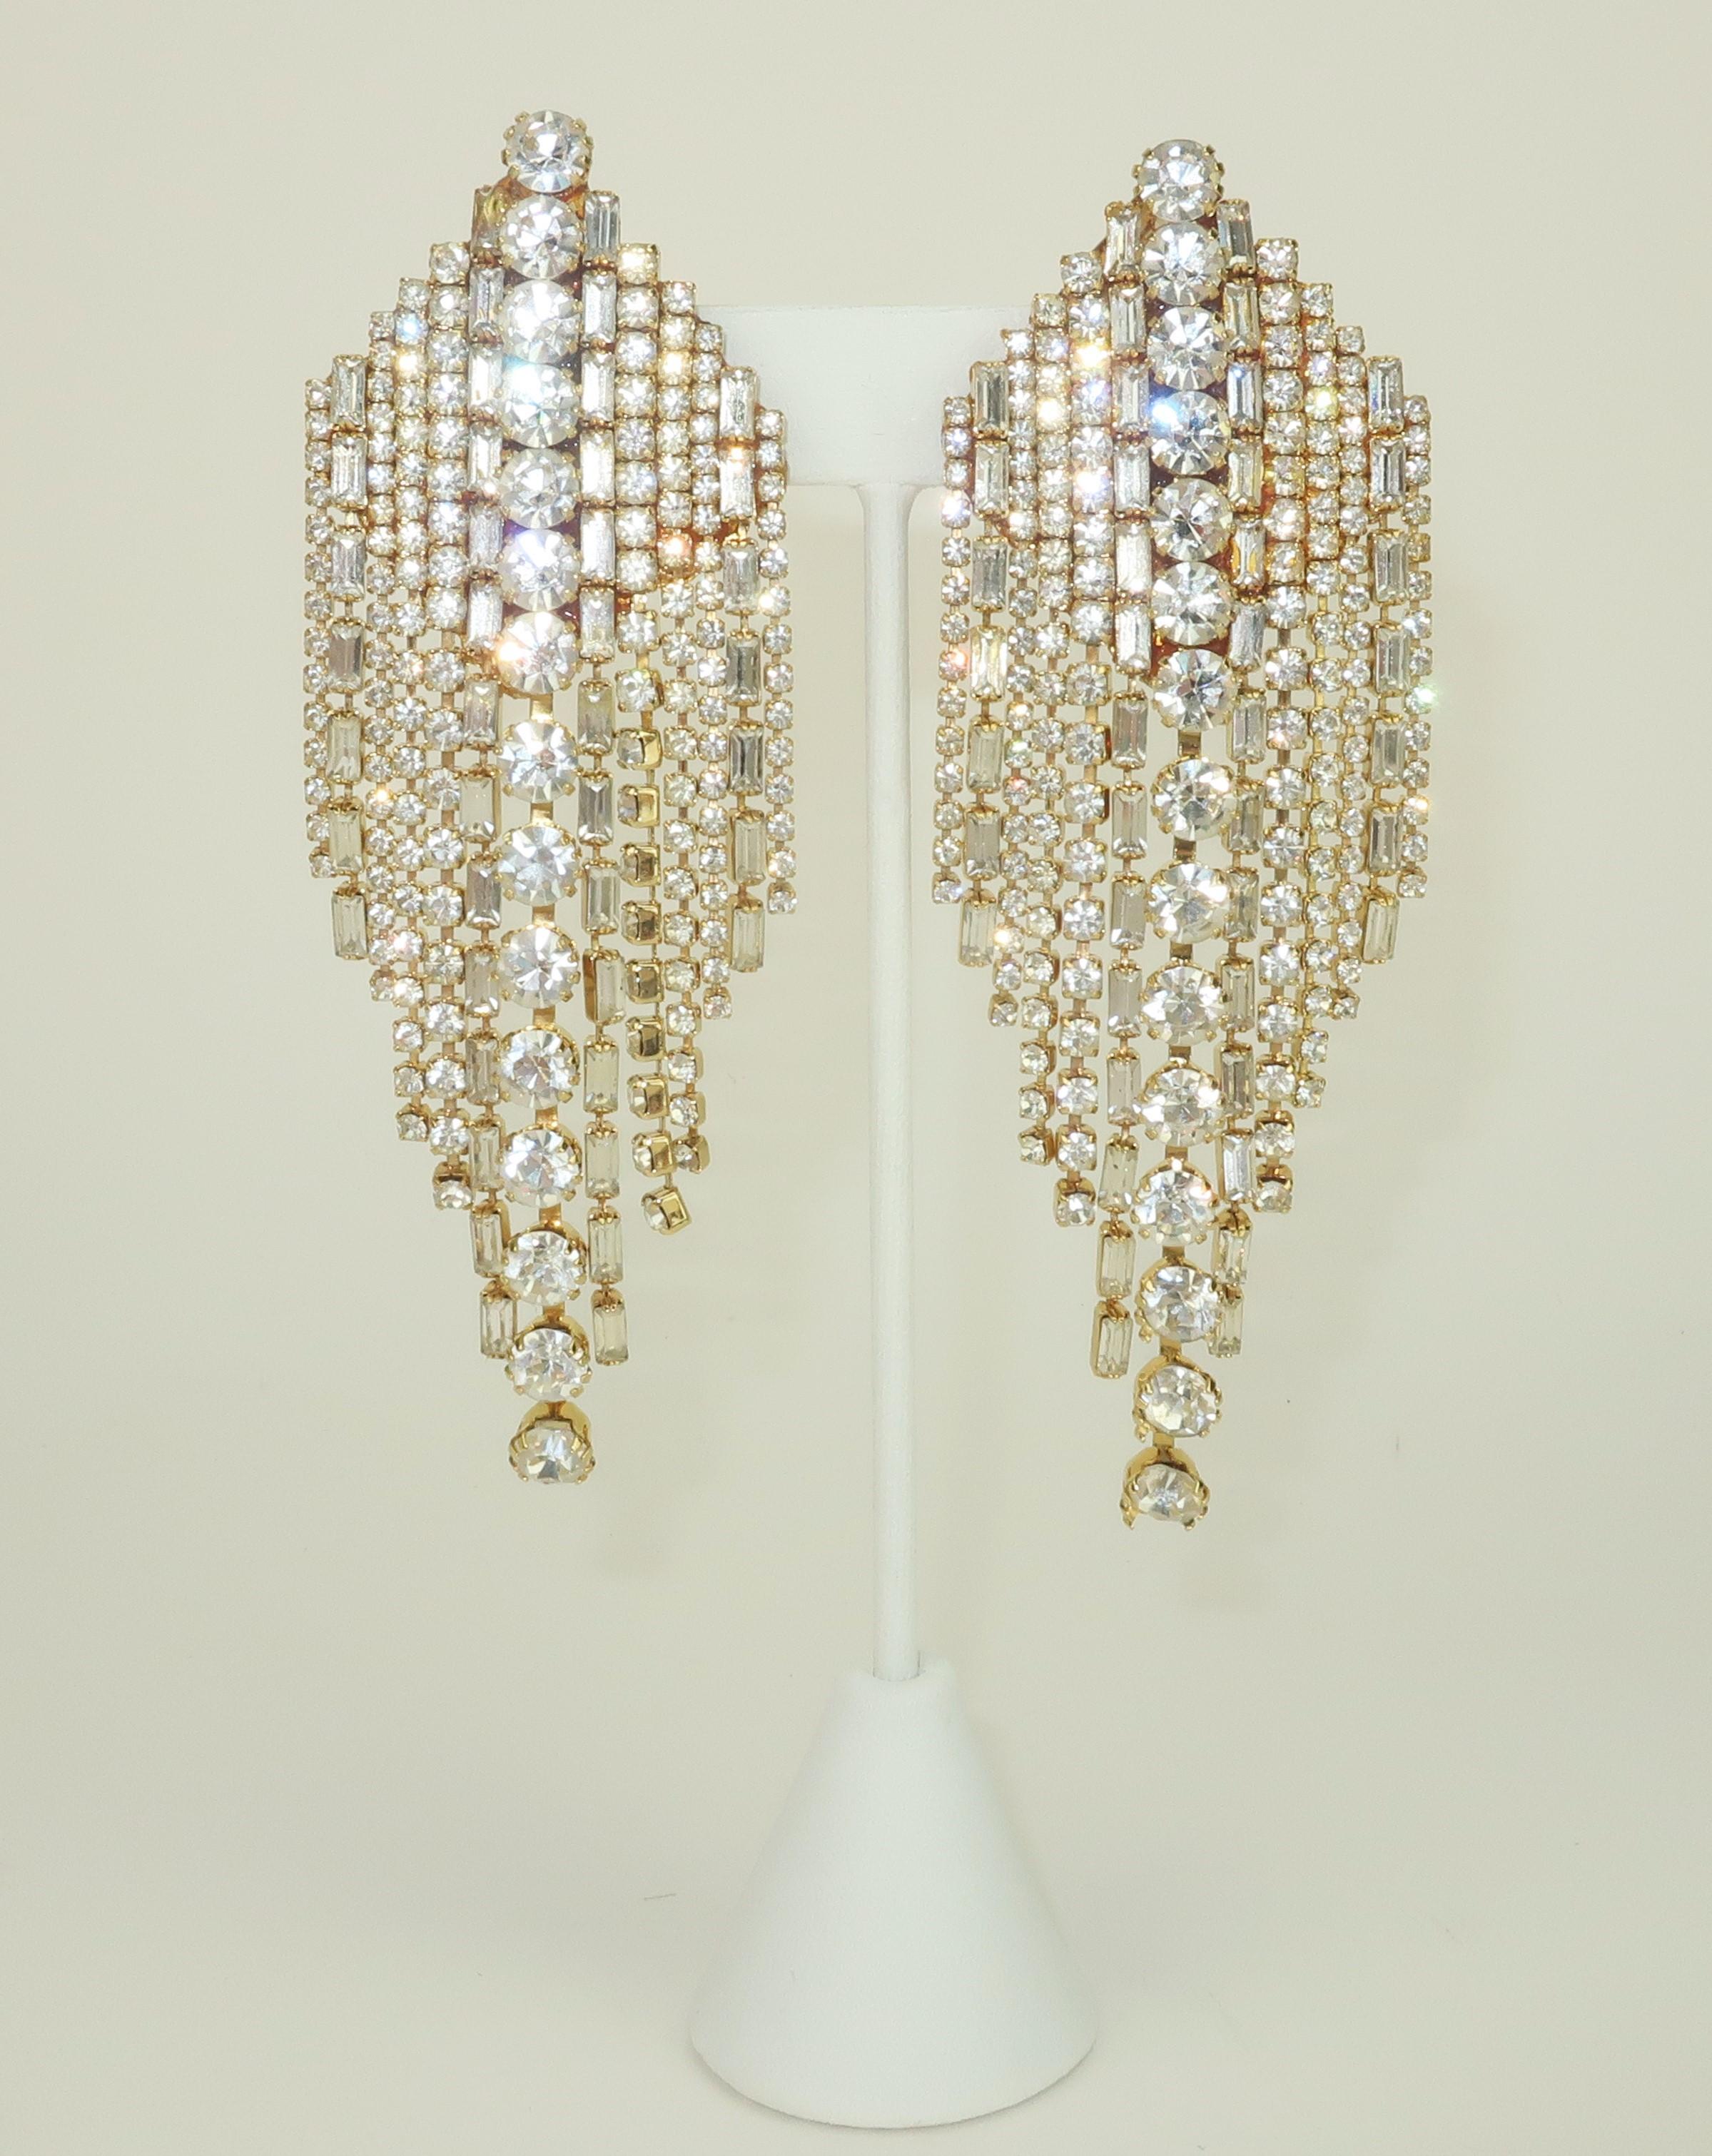 1980's crystal rhinestone clip on earrings with a glamorous waterfall silhouette and a nod to Art Deco revival design.  The statement making earrings are designed with rows of rhinestones in varying shapes chained together to form dangles with loads